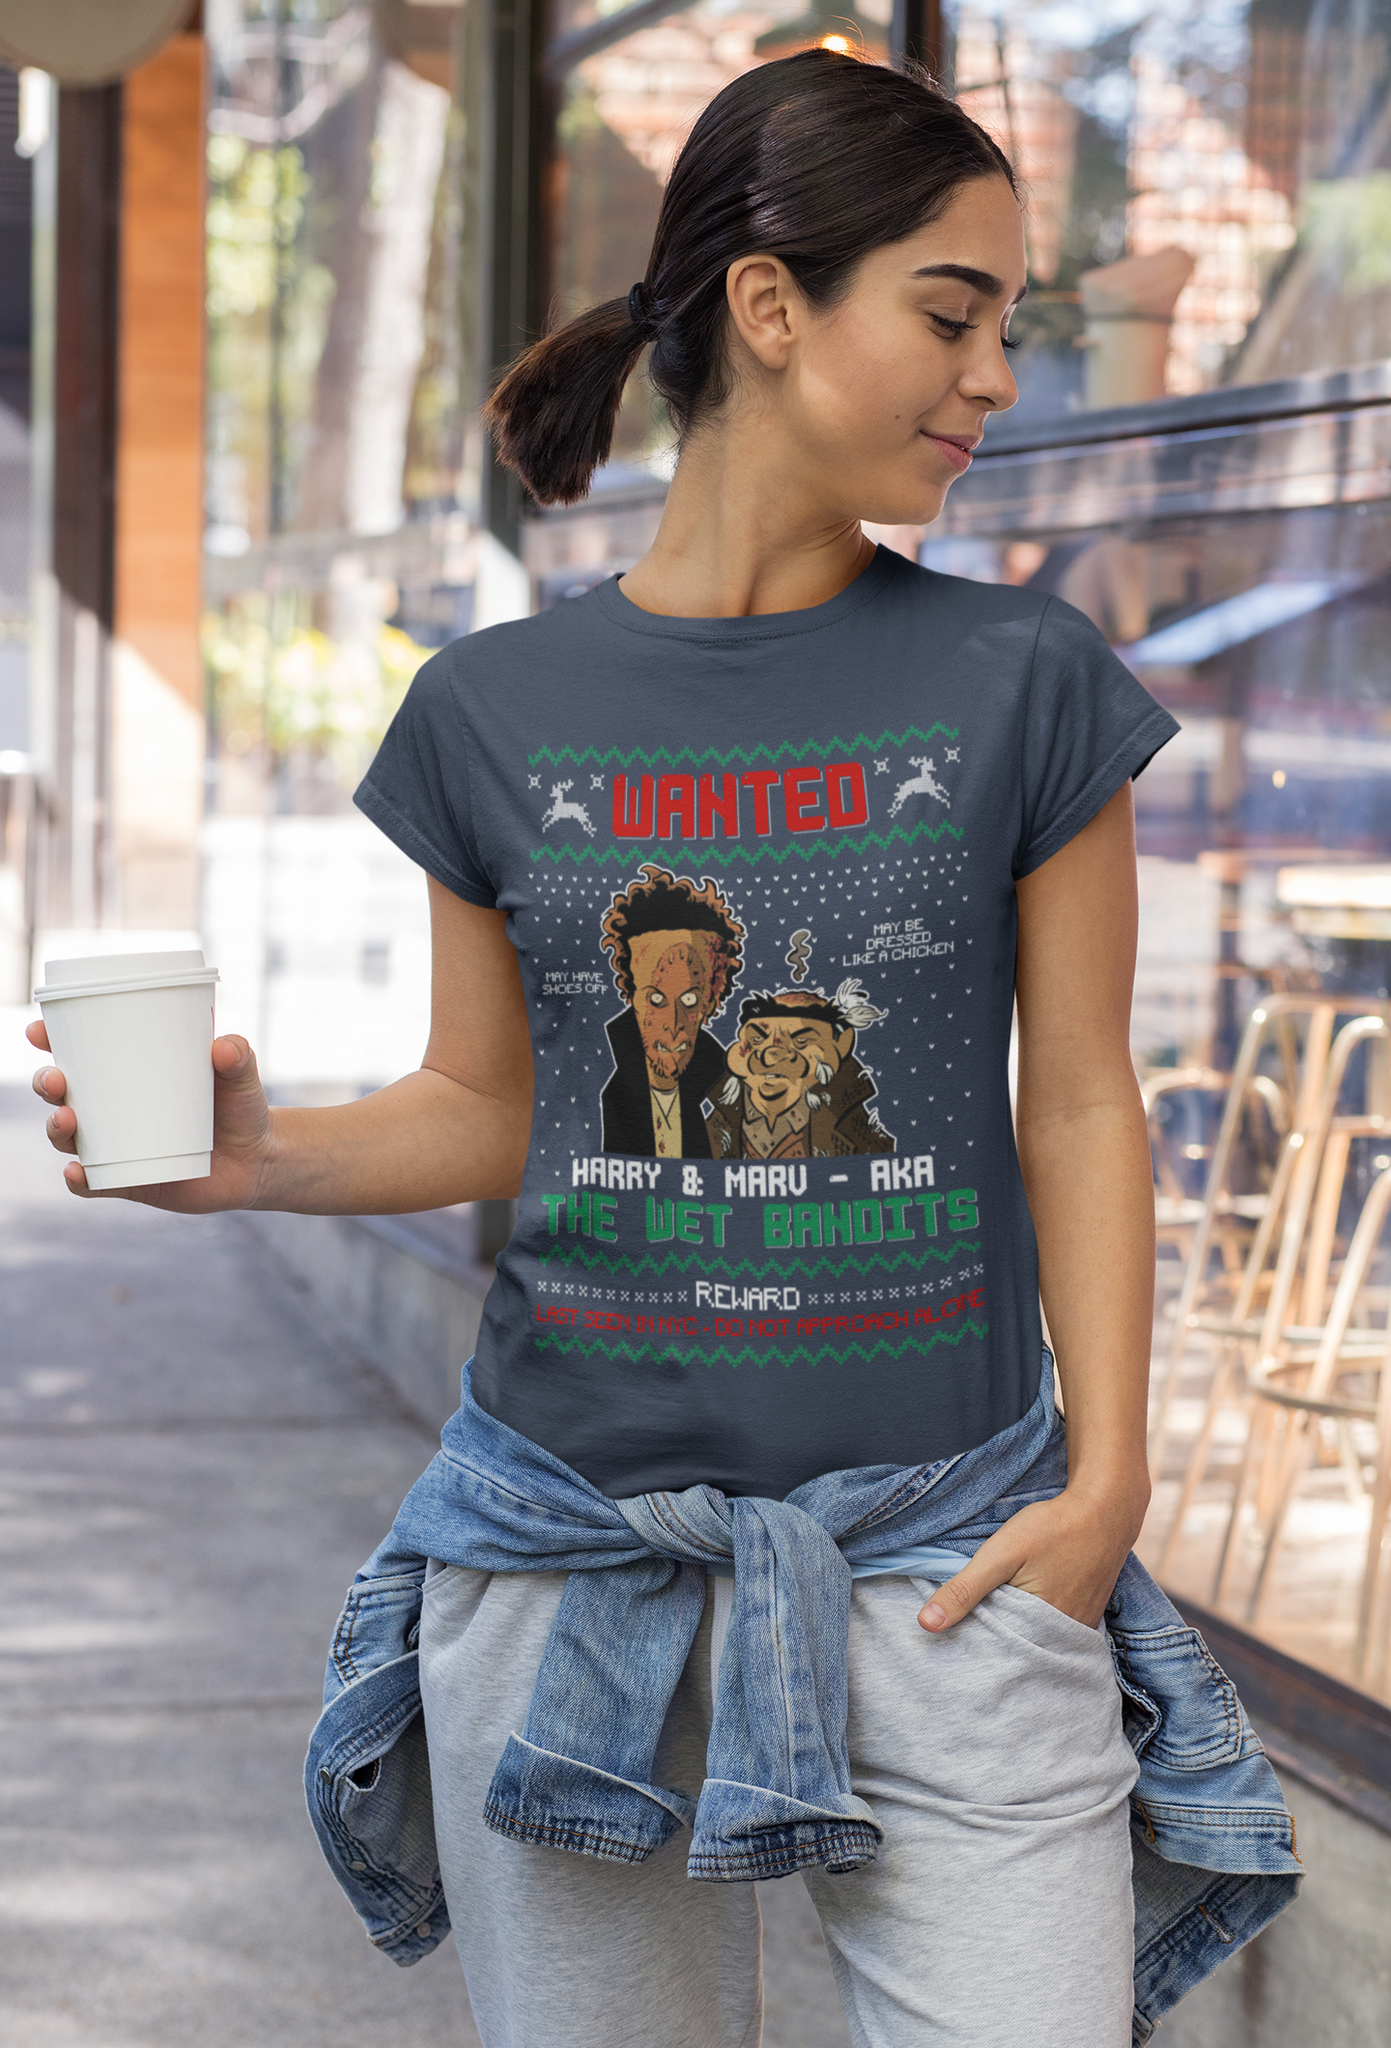 Home Alone Ugly Sweater Shirt, The Harry Marv T Shirt, Wanted The Wet Bandits Last Seen In NYC Shirt, Christmas Gifts